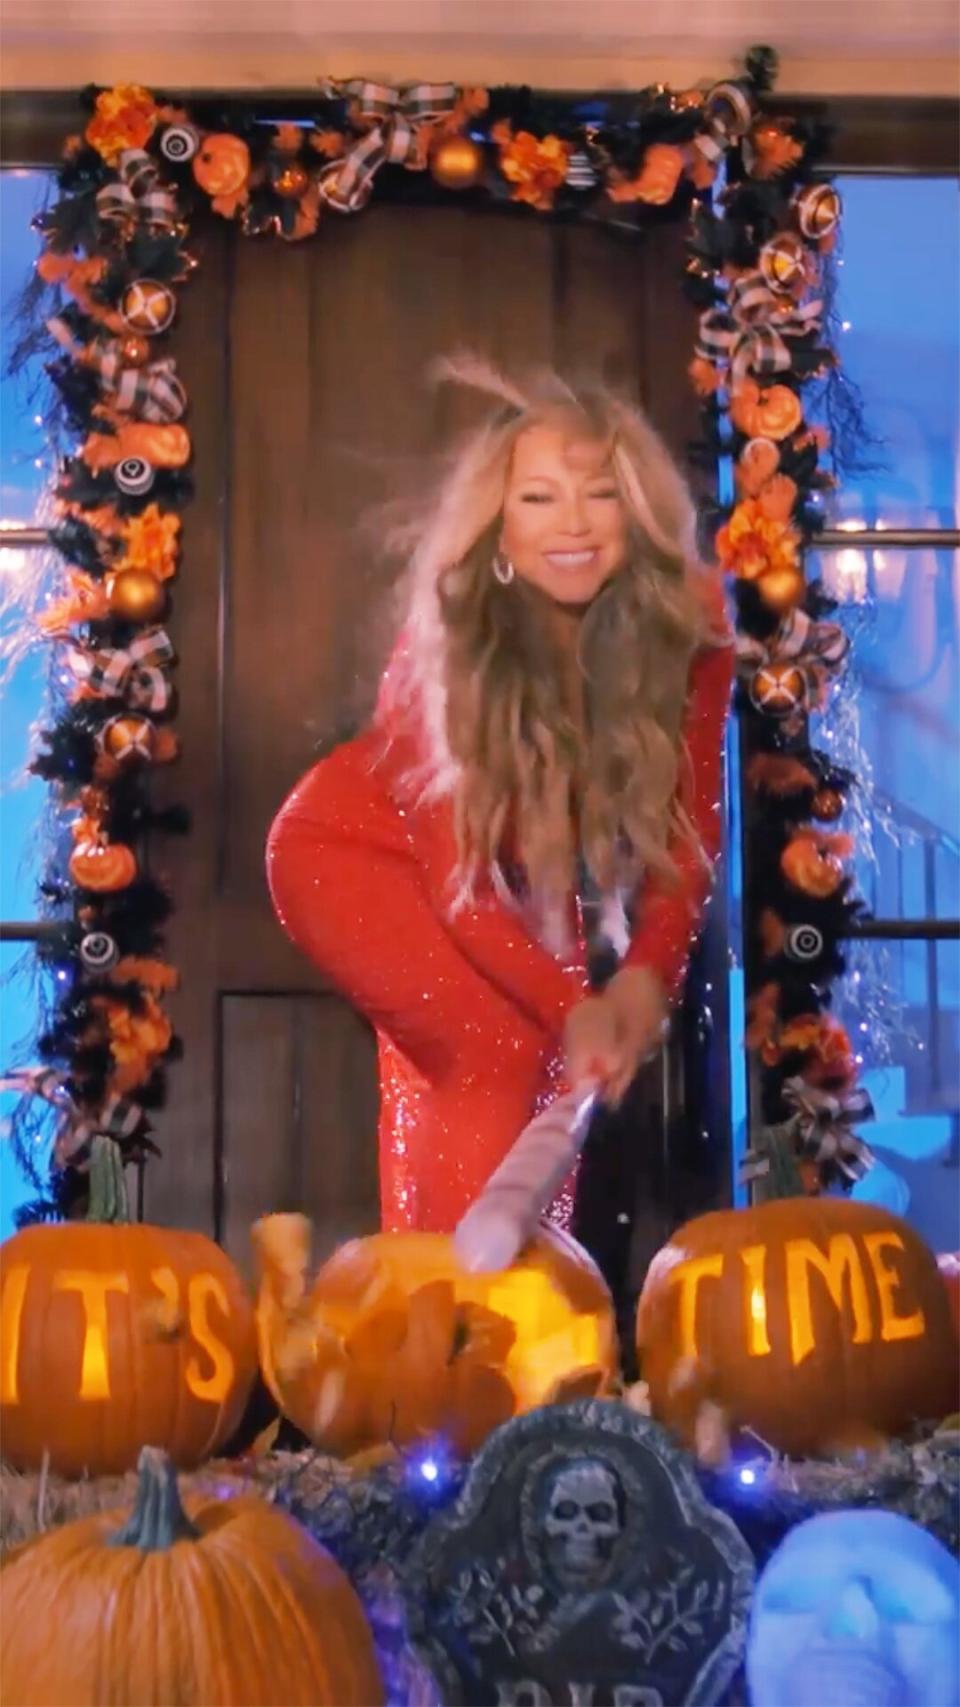 Mariah Carey Kicks Off Christmas Countdown in Exciting Video: 'It's Time'